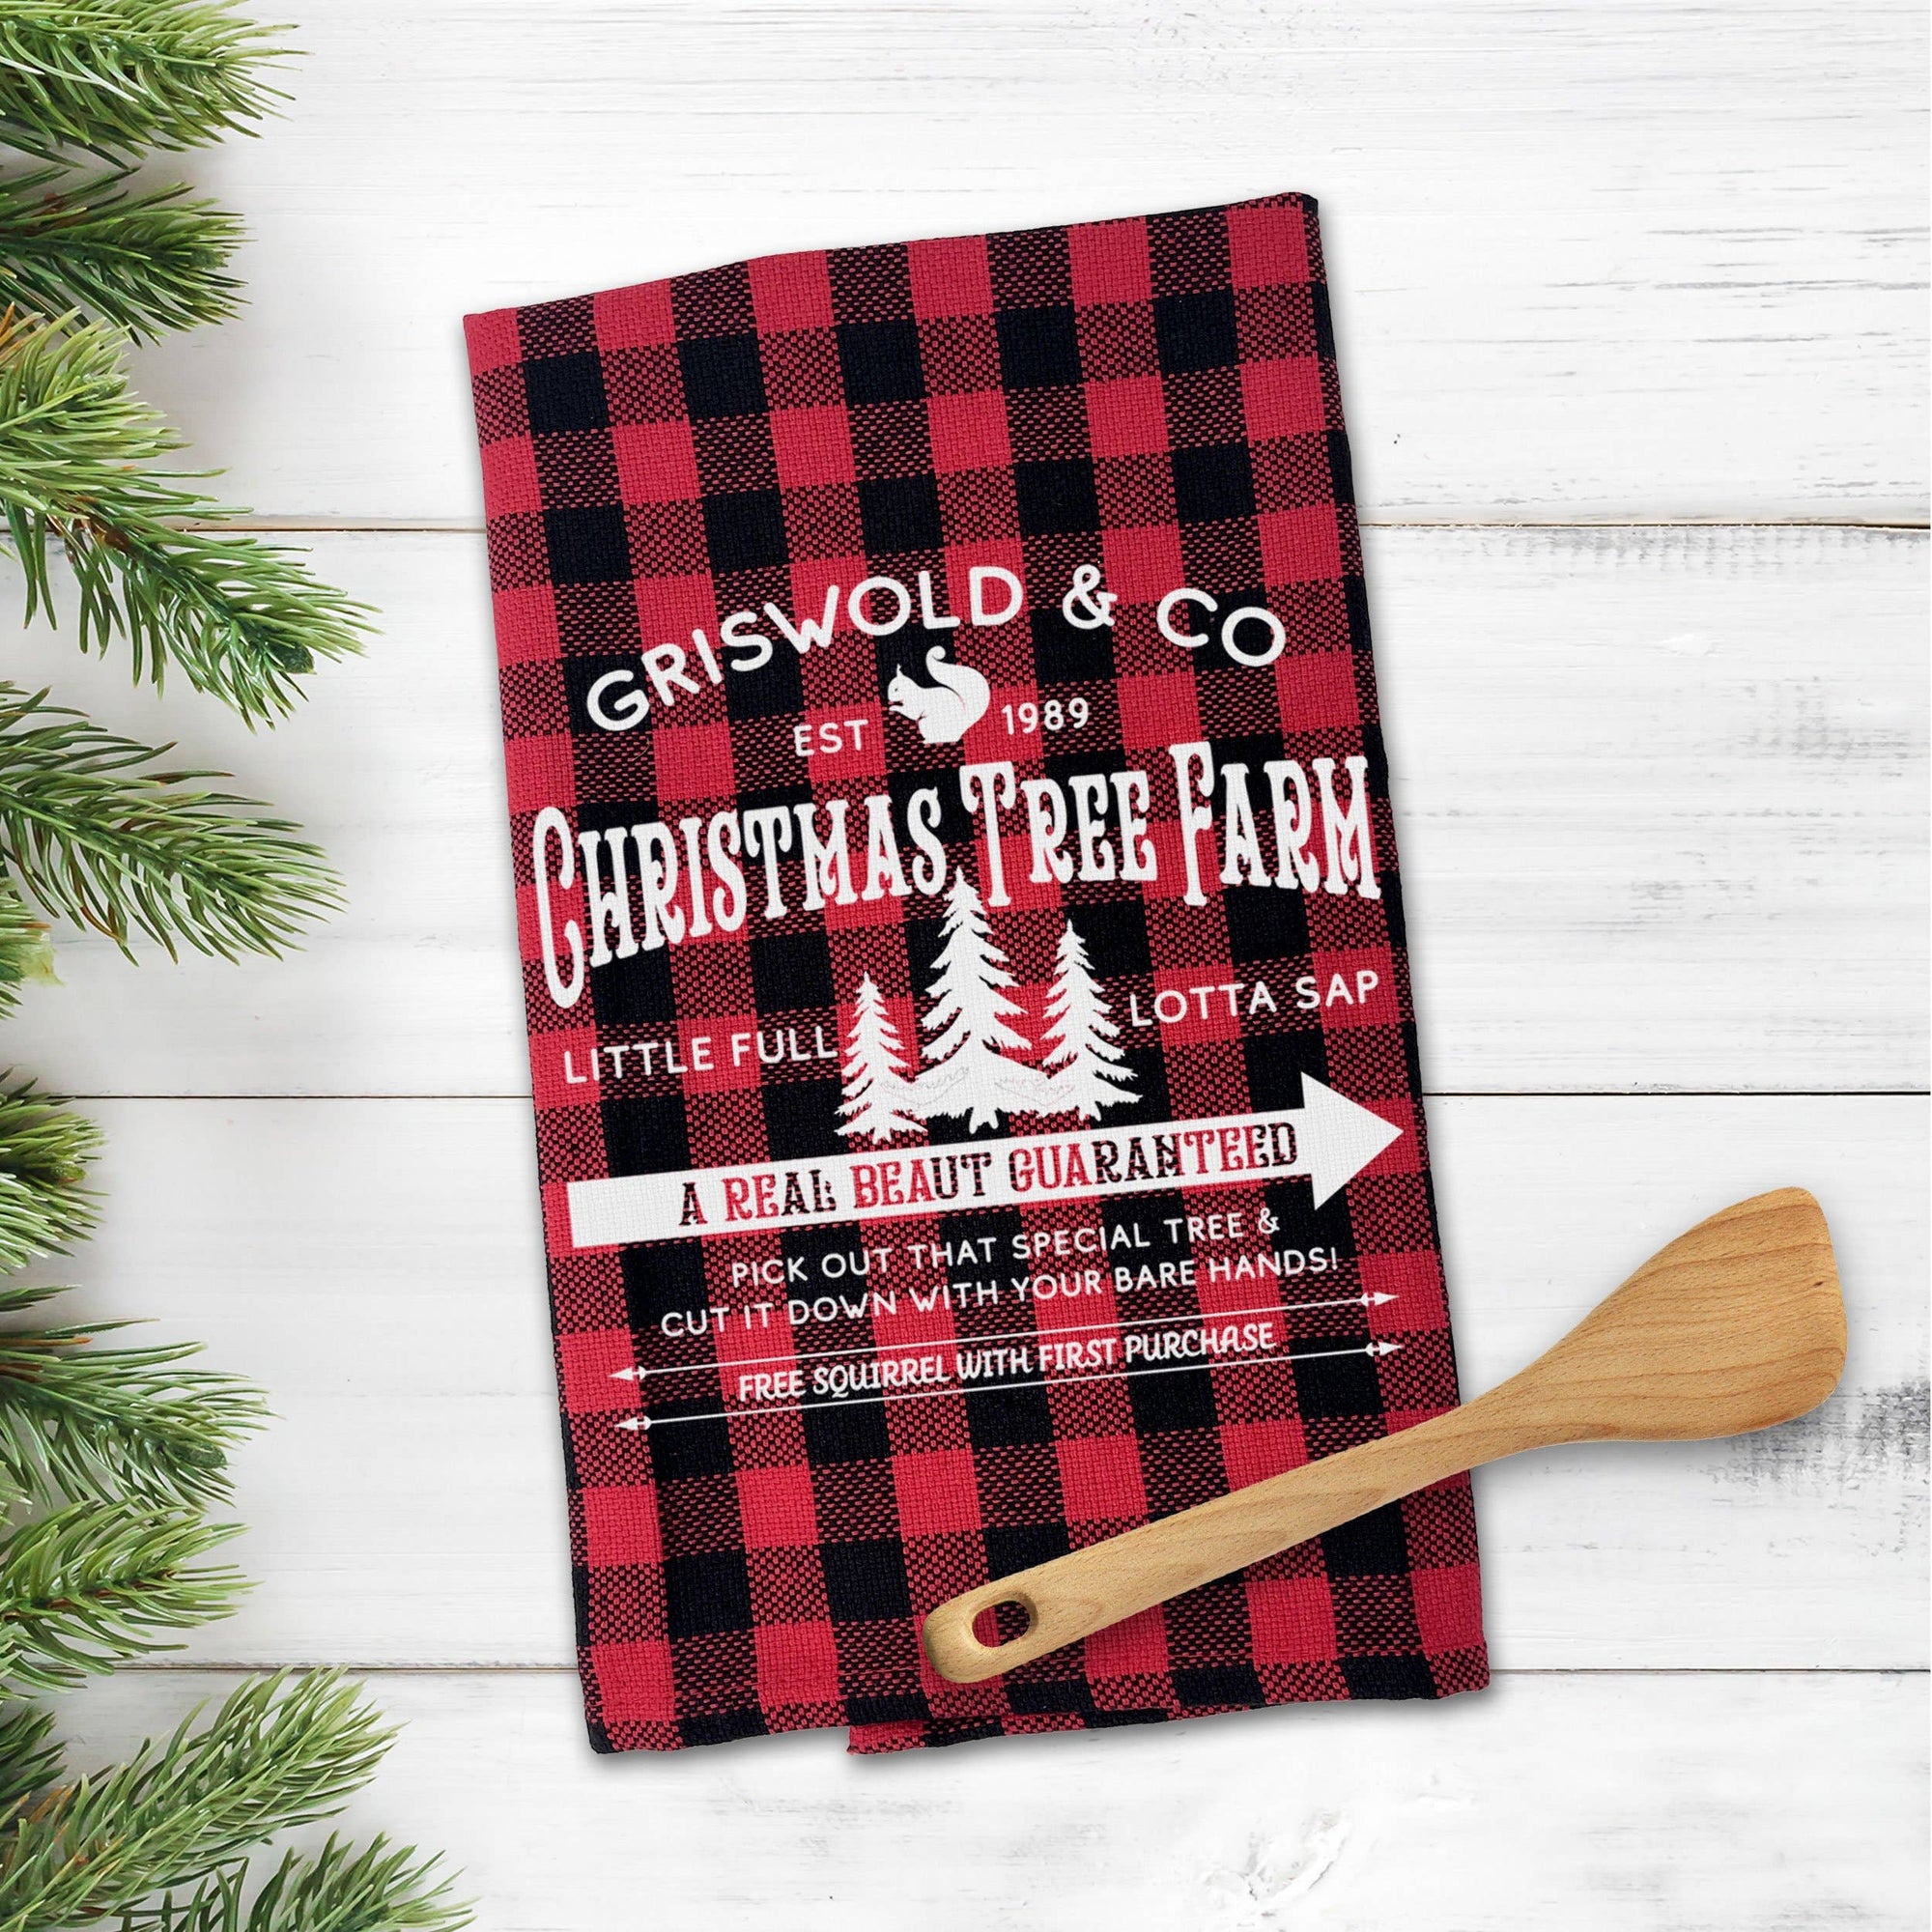 Christmas Vacation Inspired Tea Towel Griswold Christmas Tree Farm Tea Towel Novelty Christmas Tea Towel Black Red Buffalo Plaid